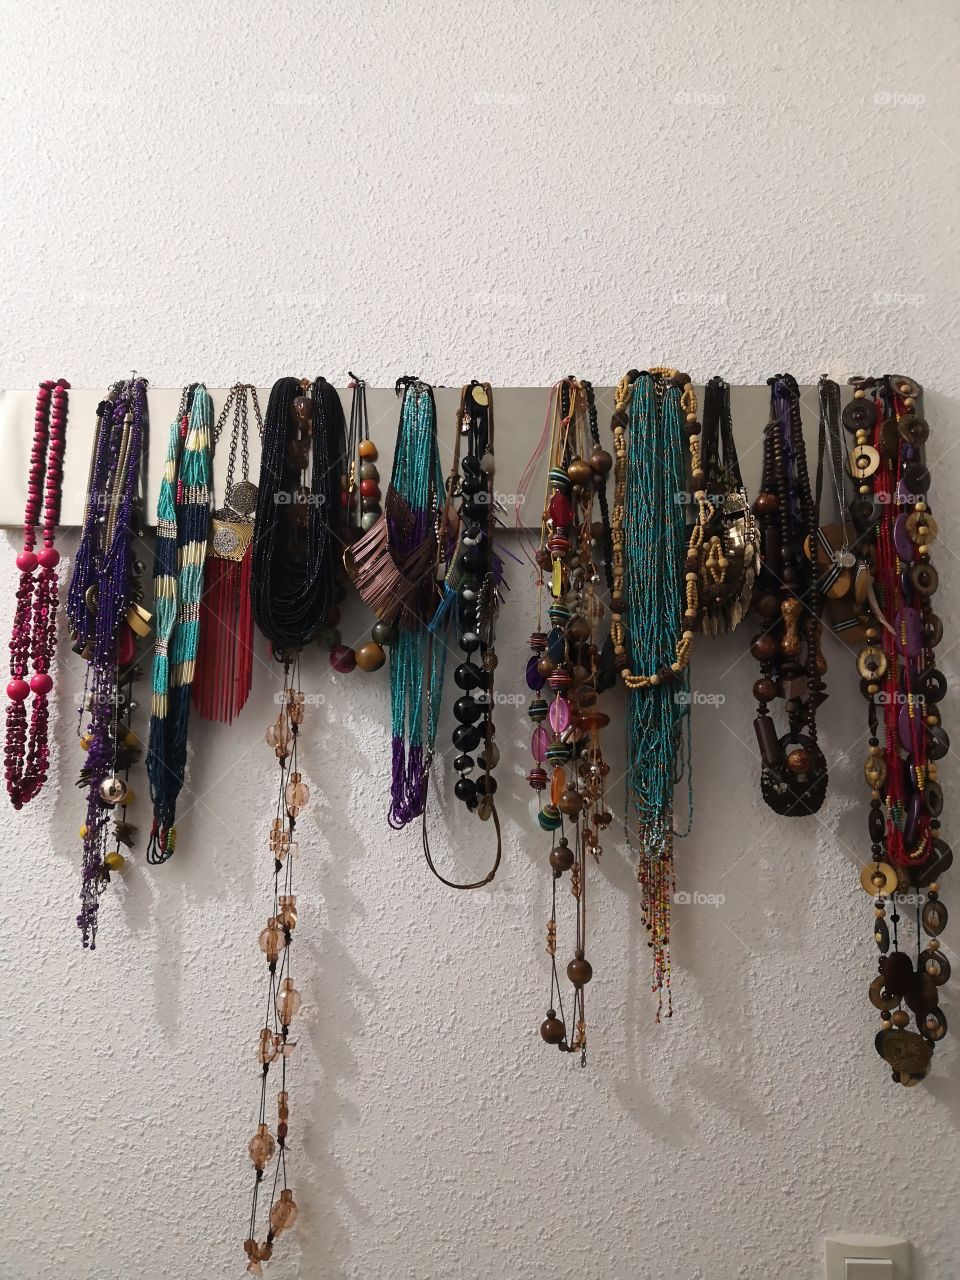 My Necklace collection